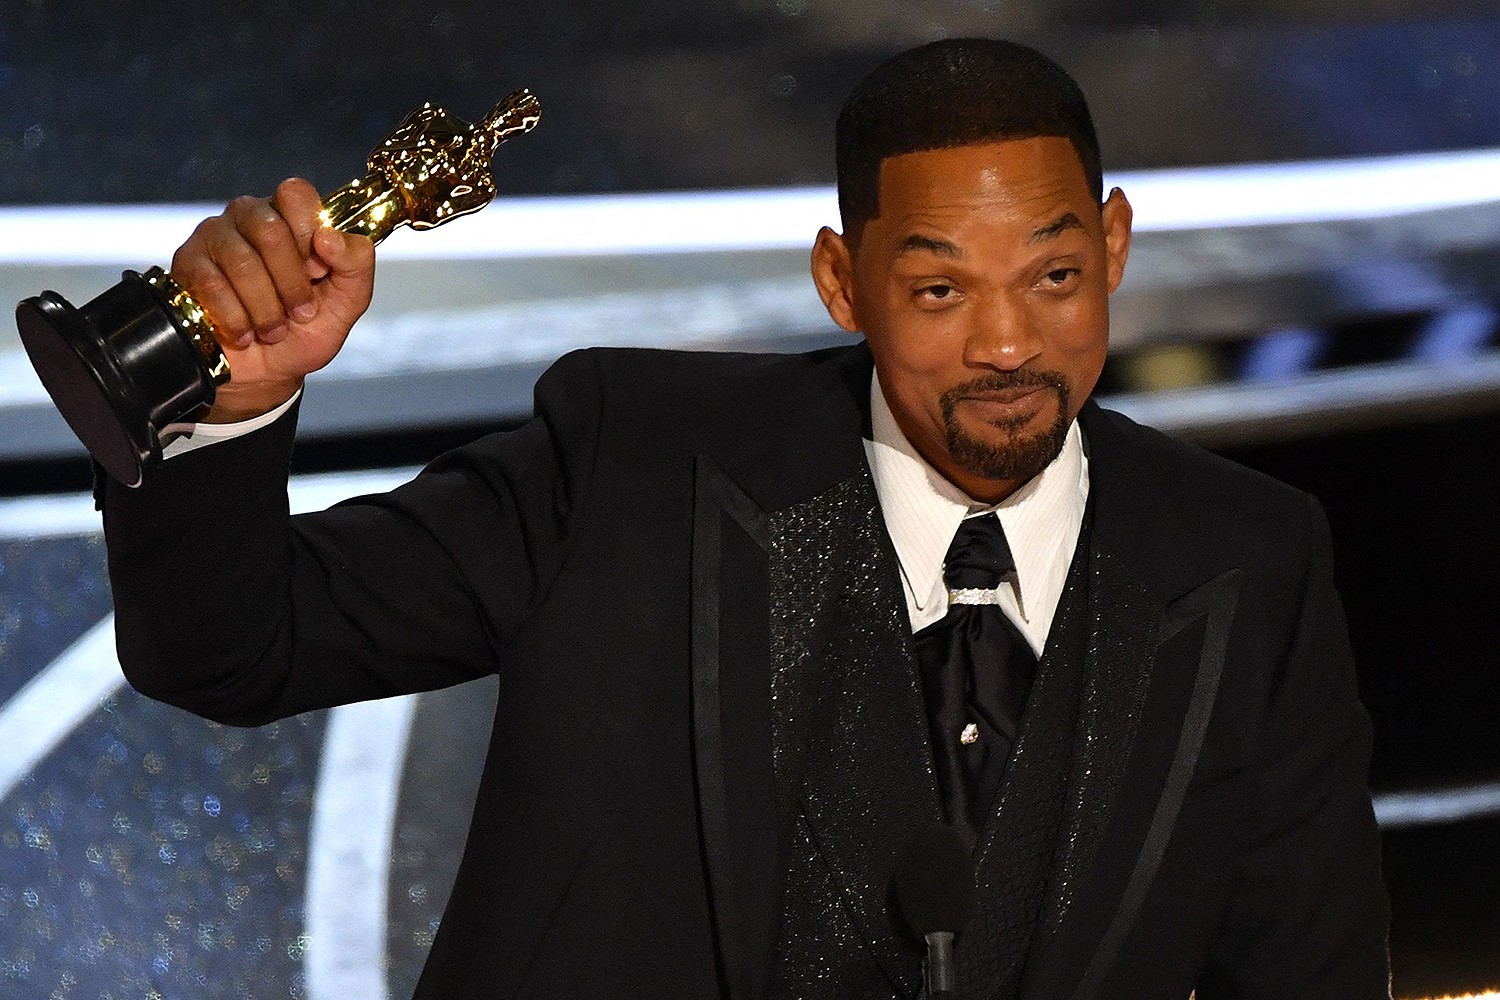 Will Smith won his Best Actor Oscar for King Richard